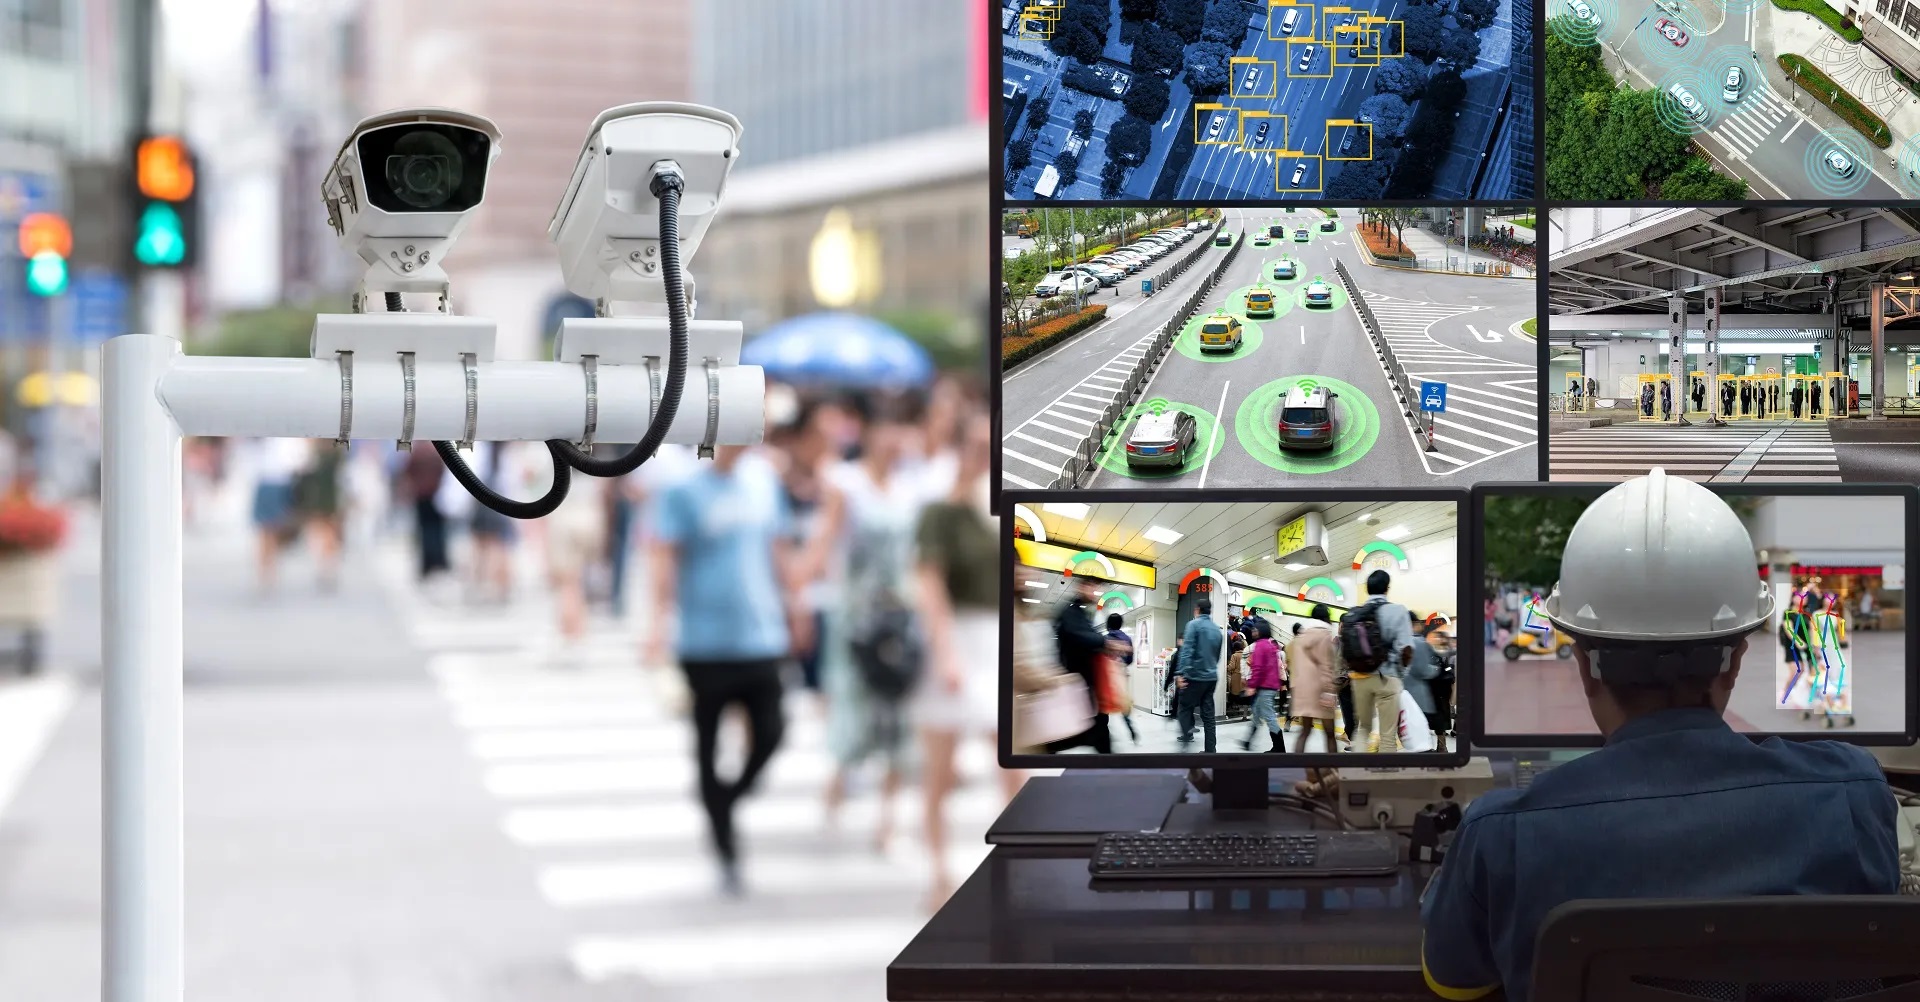 CCTV and Video Surveillance Systems Market